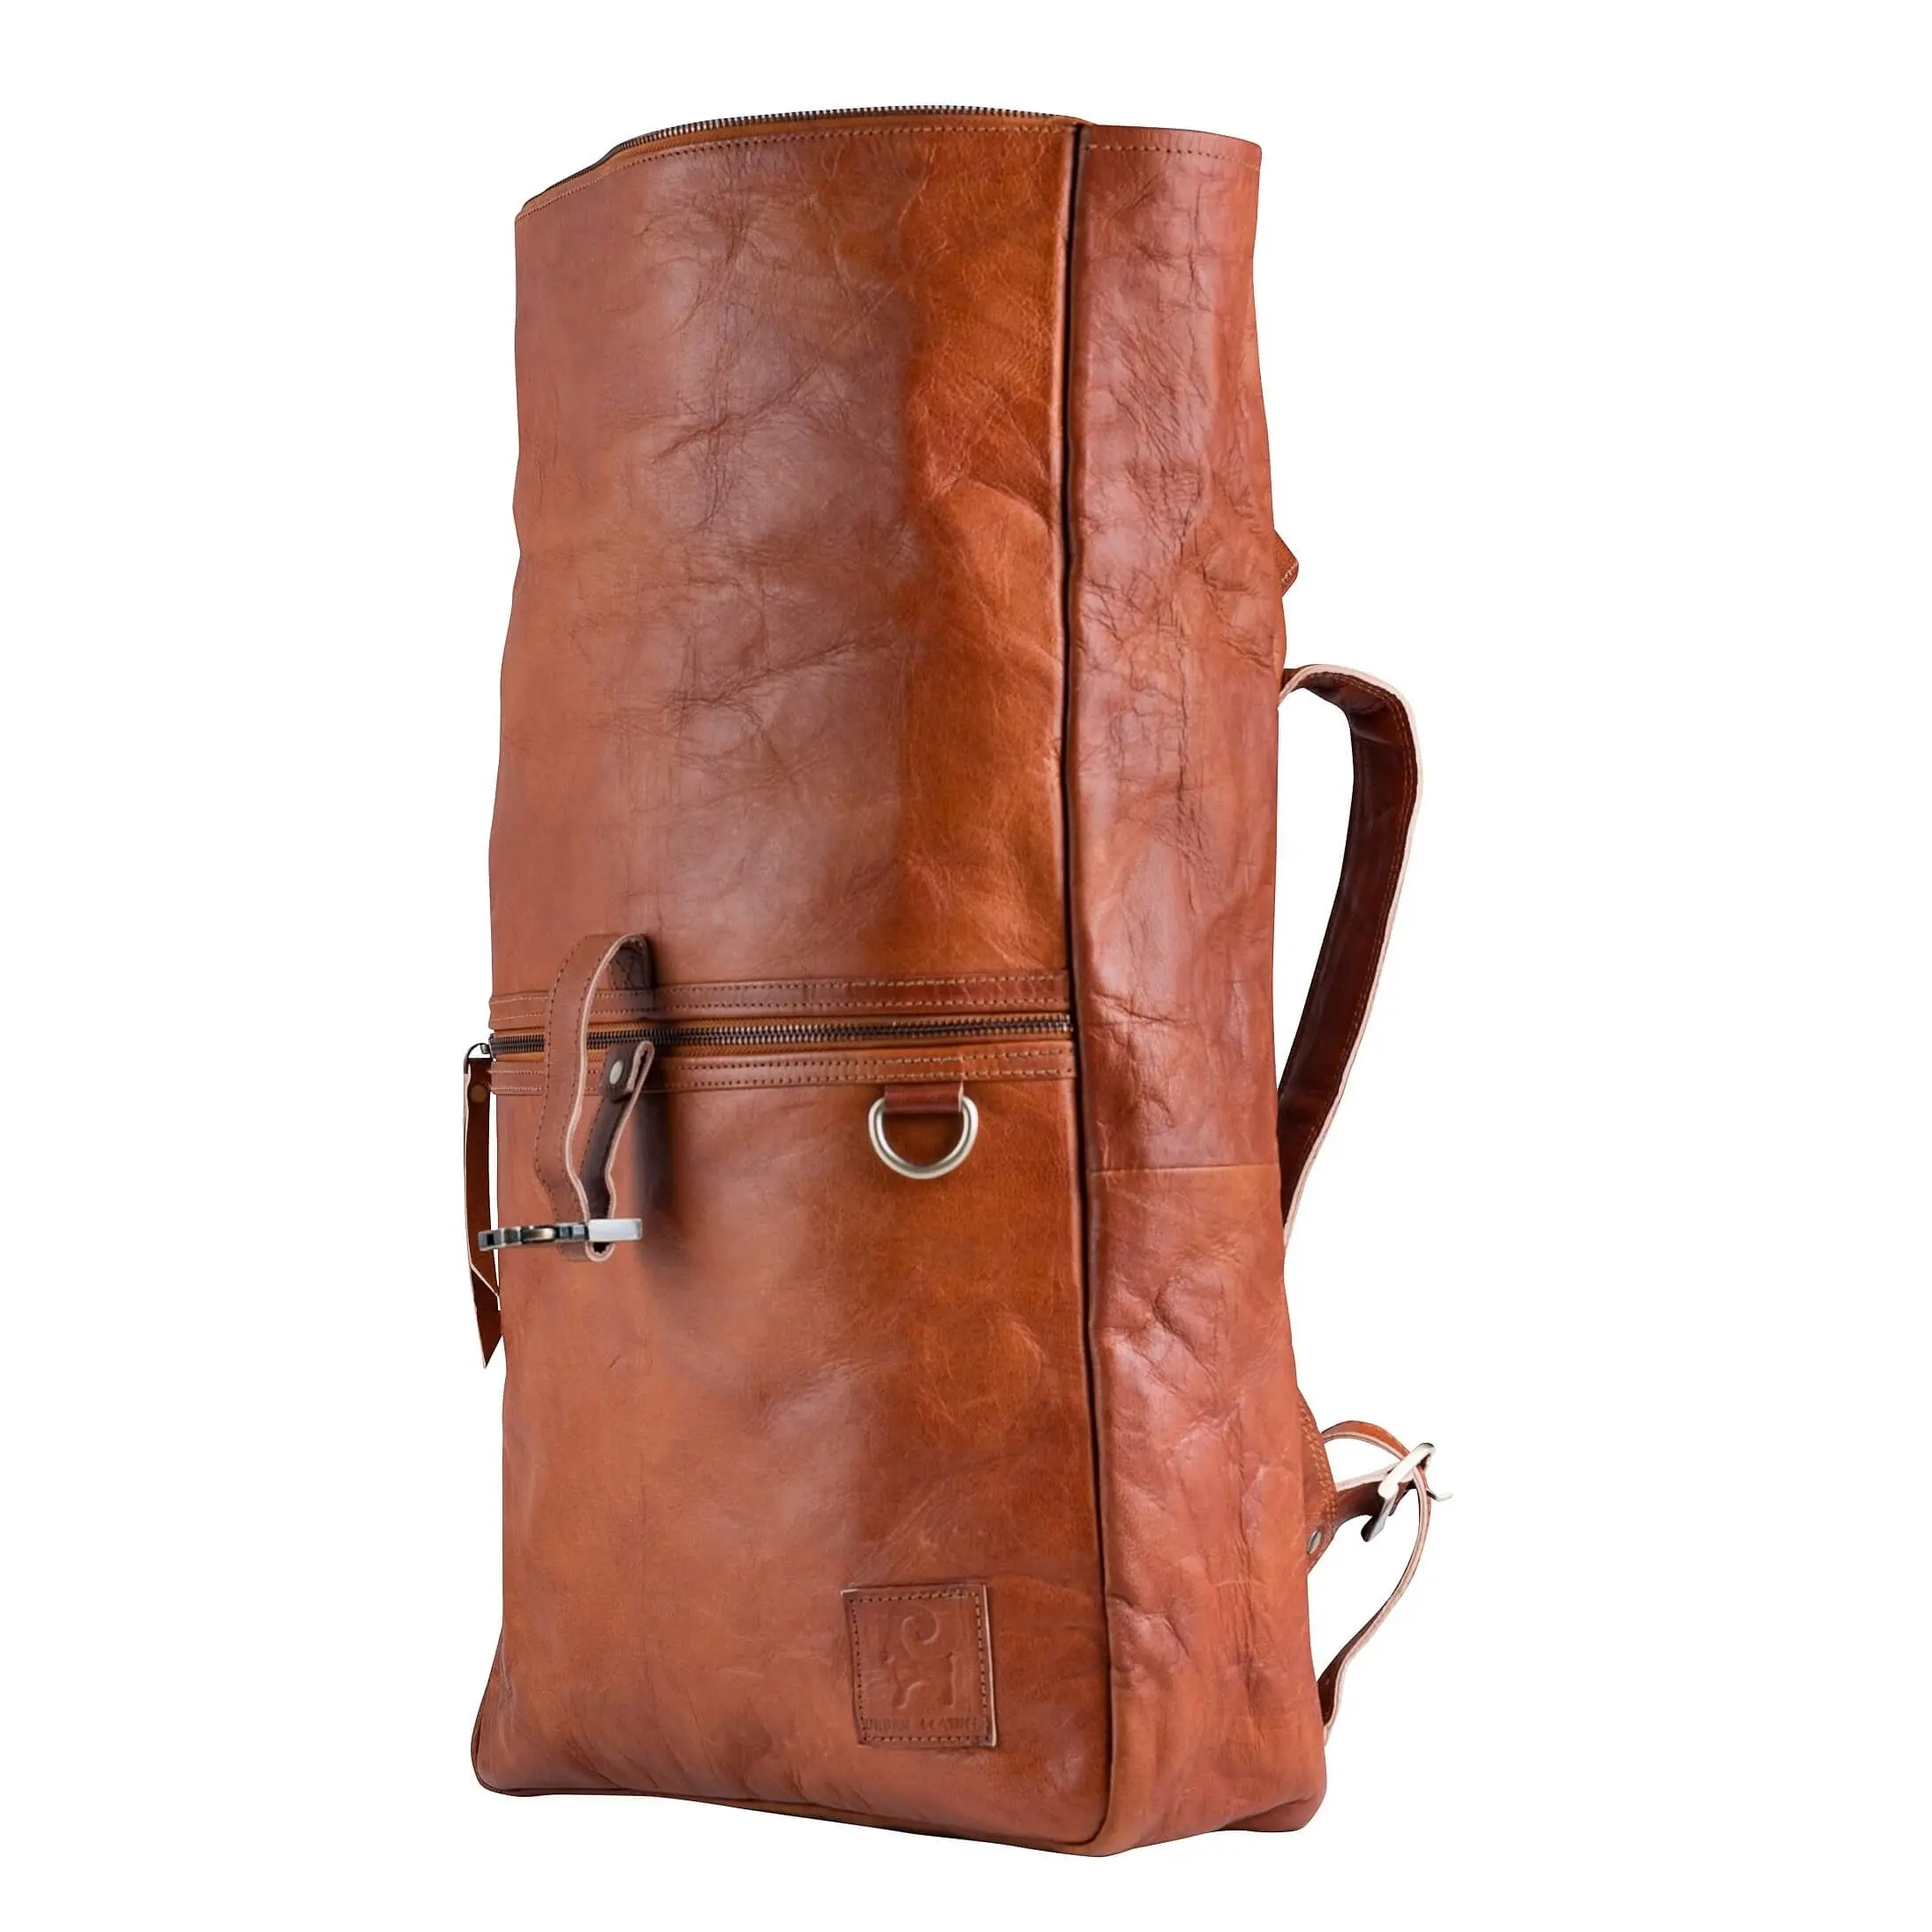 Backpack Men's And Women Backpack High Quality Leather Bag Fashion Casual Bag with OEM logo